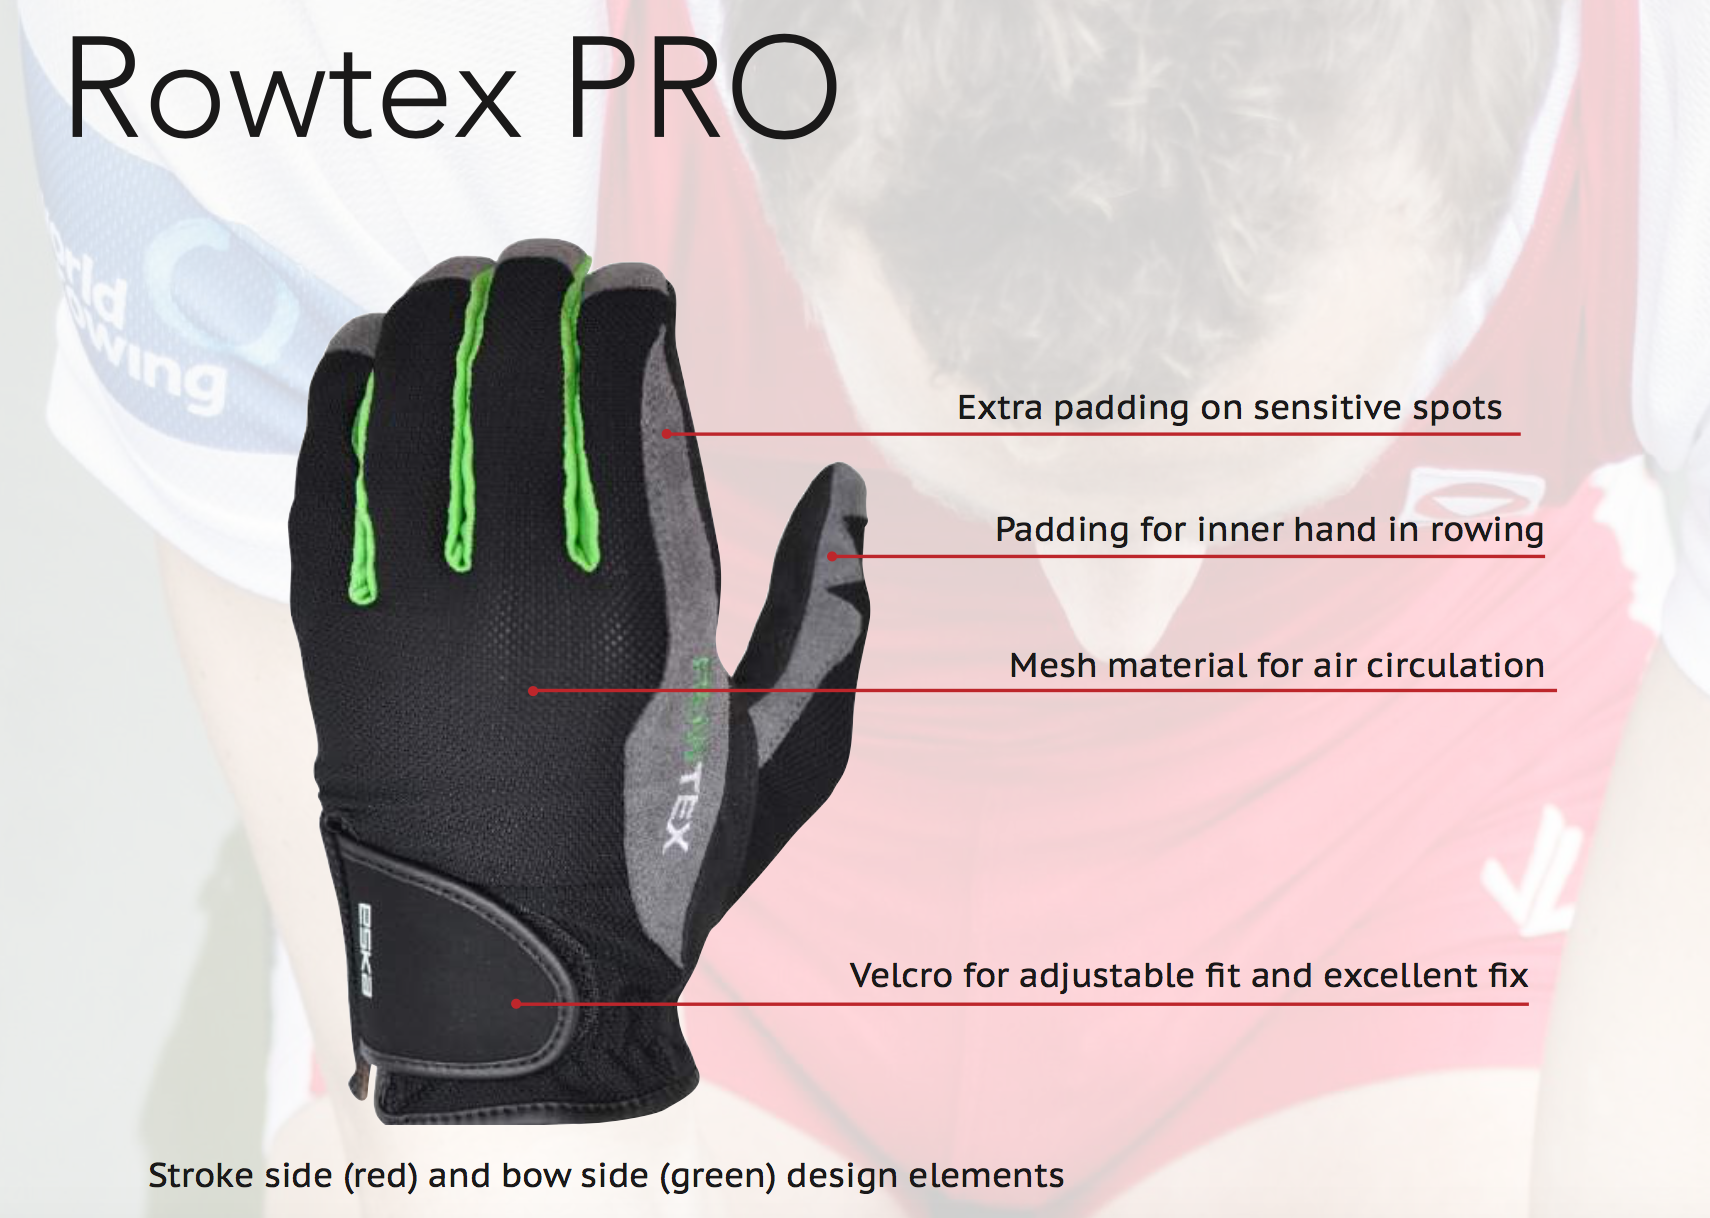 Rowtex Pro specifications